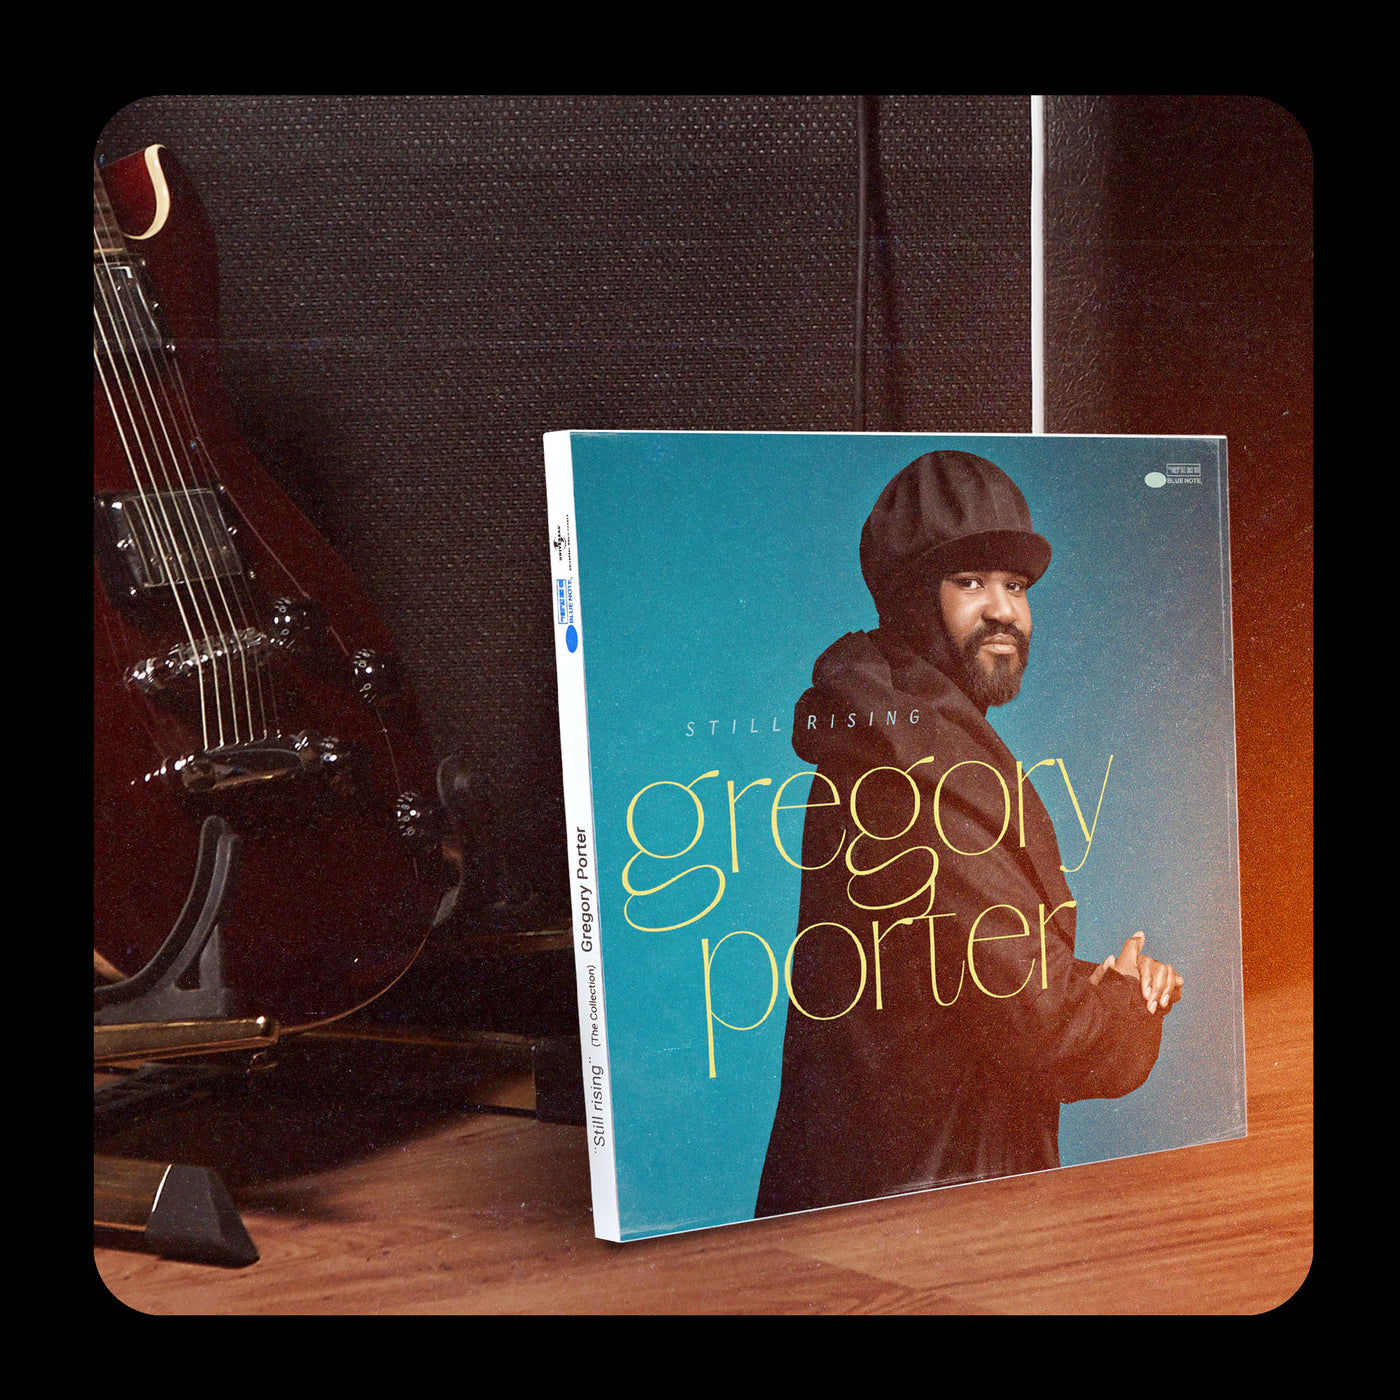 Connected Album Still rising - the collection - Gregory Porter